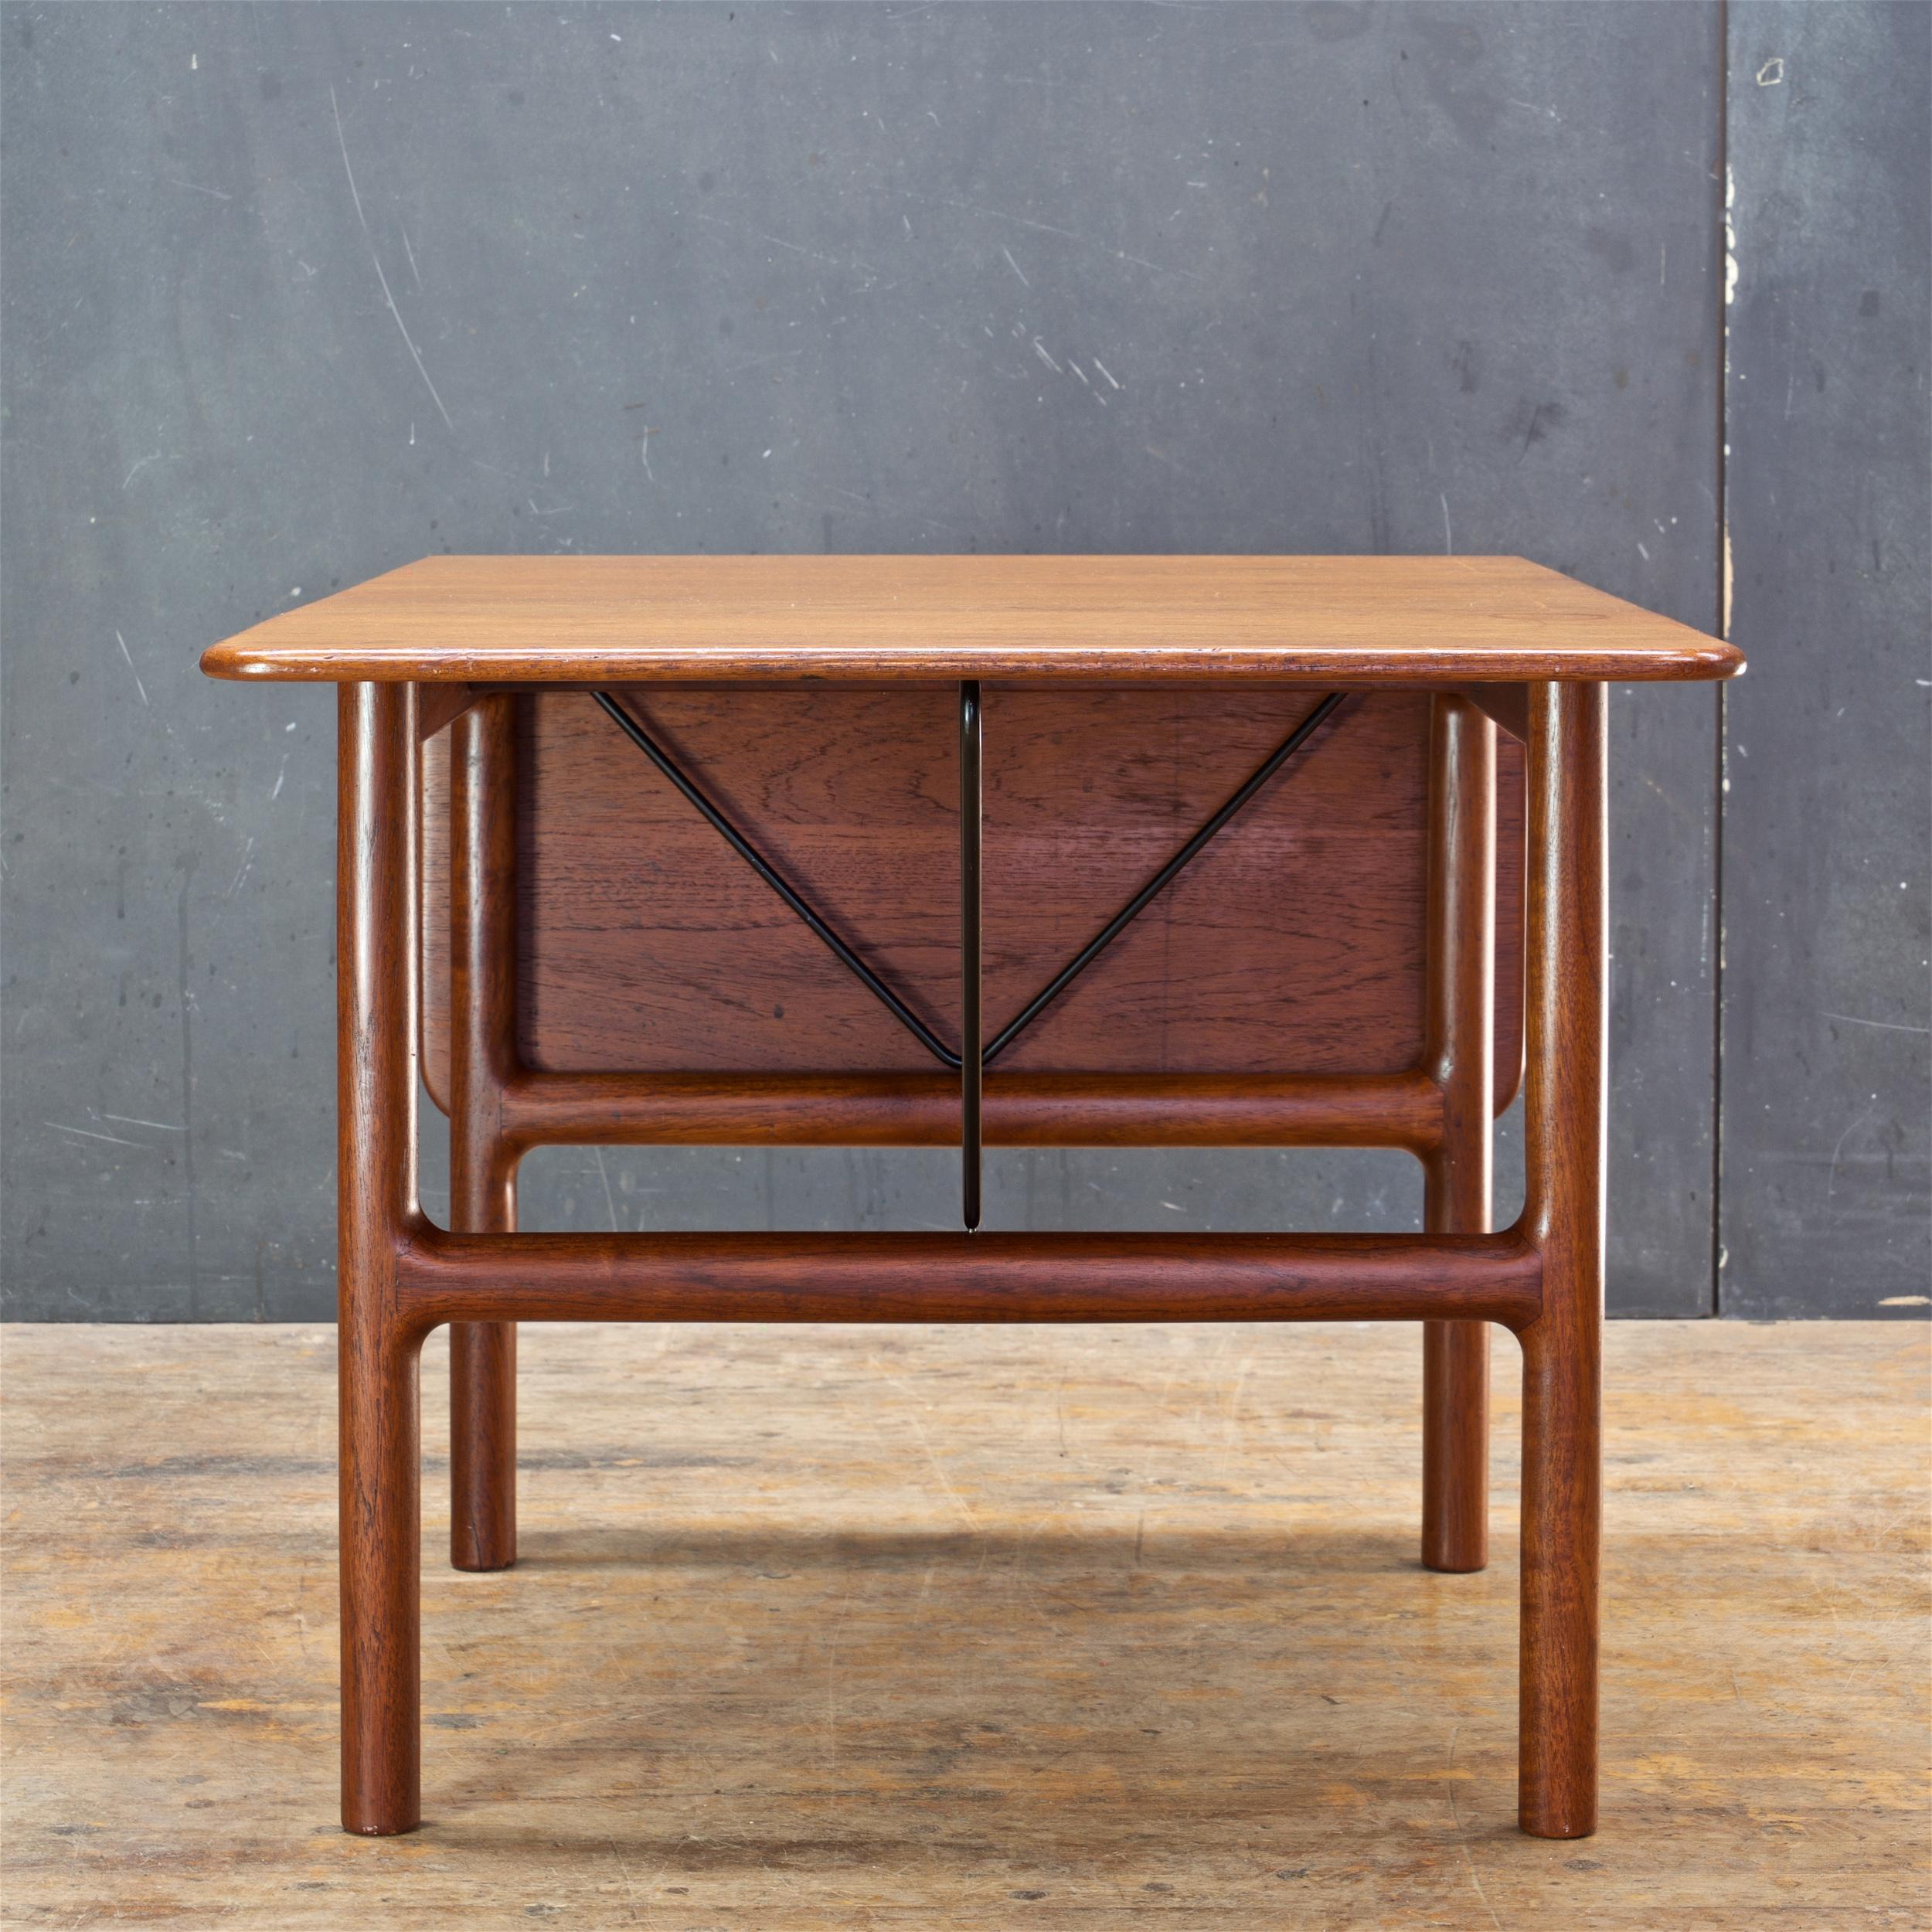 1950s Danish Architects Embassy Drop-Leaf Teak Table in Style of Hans Wegner For Sale 1